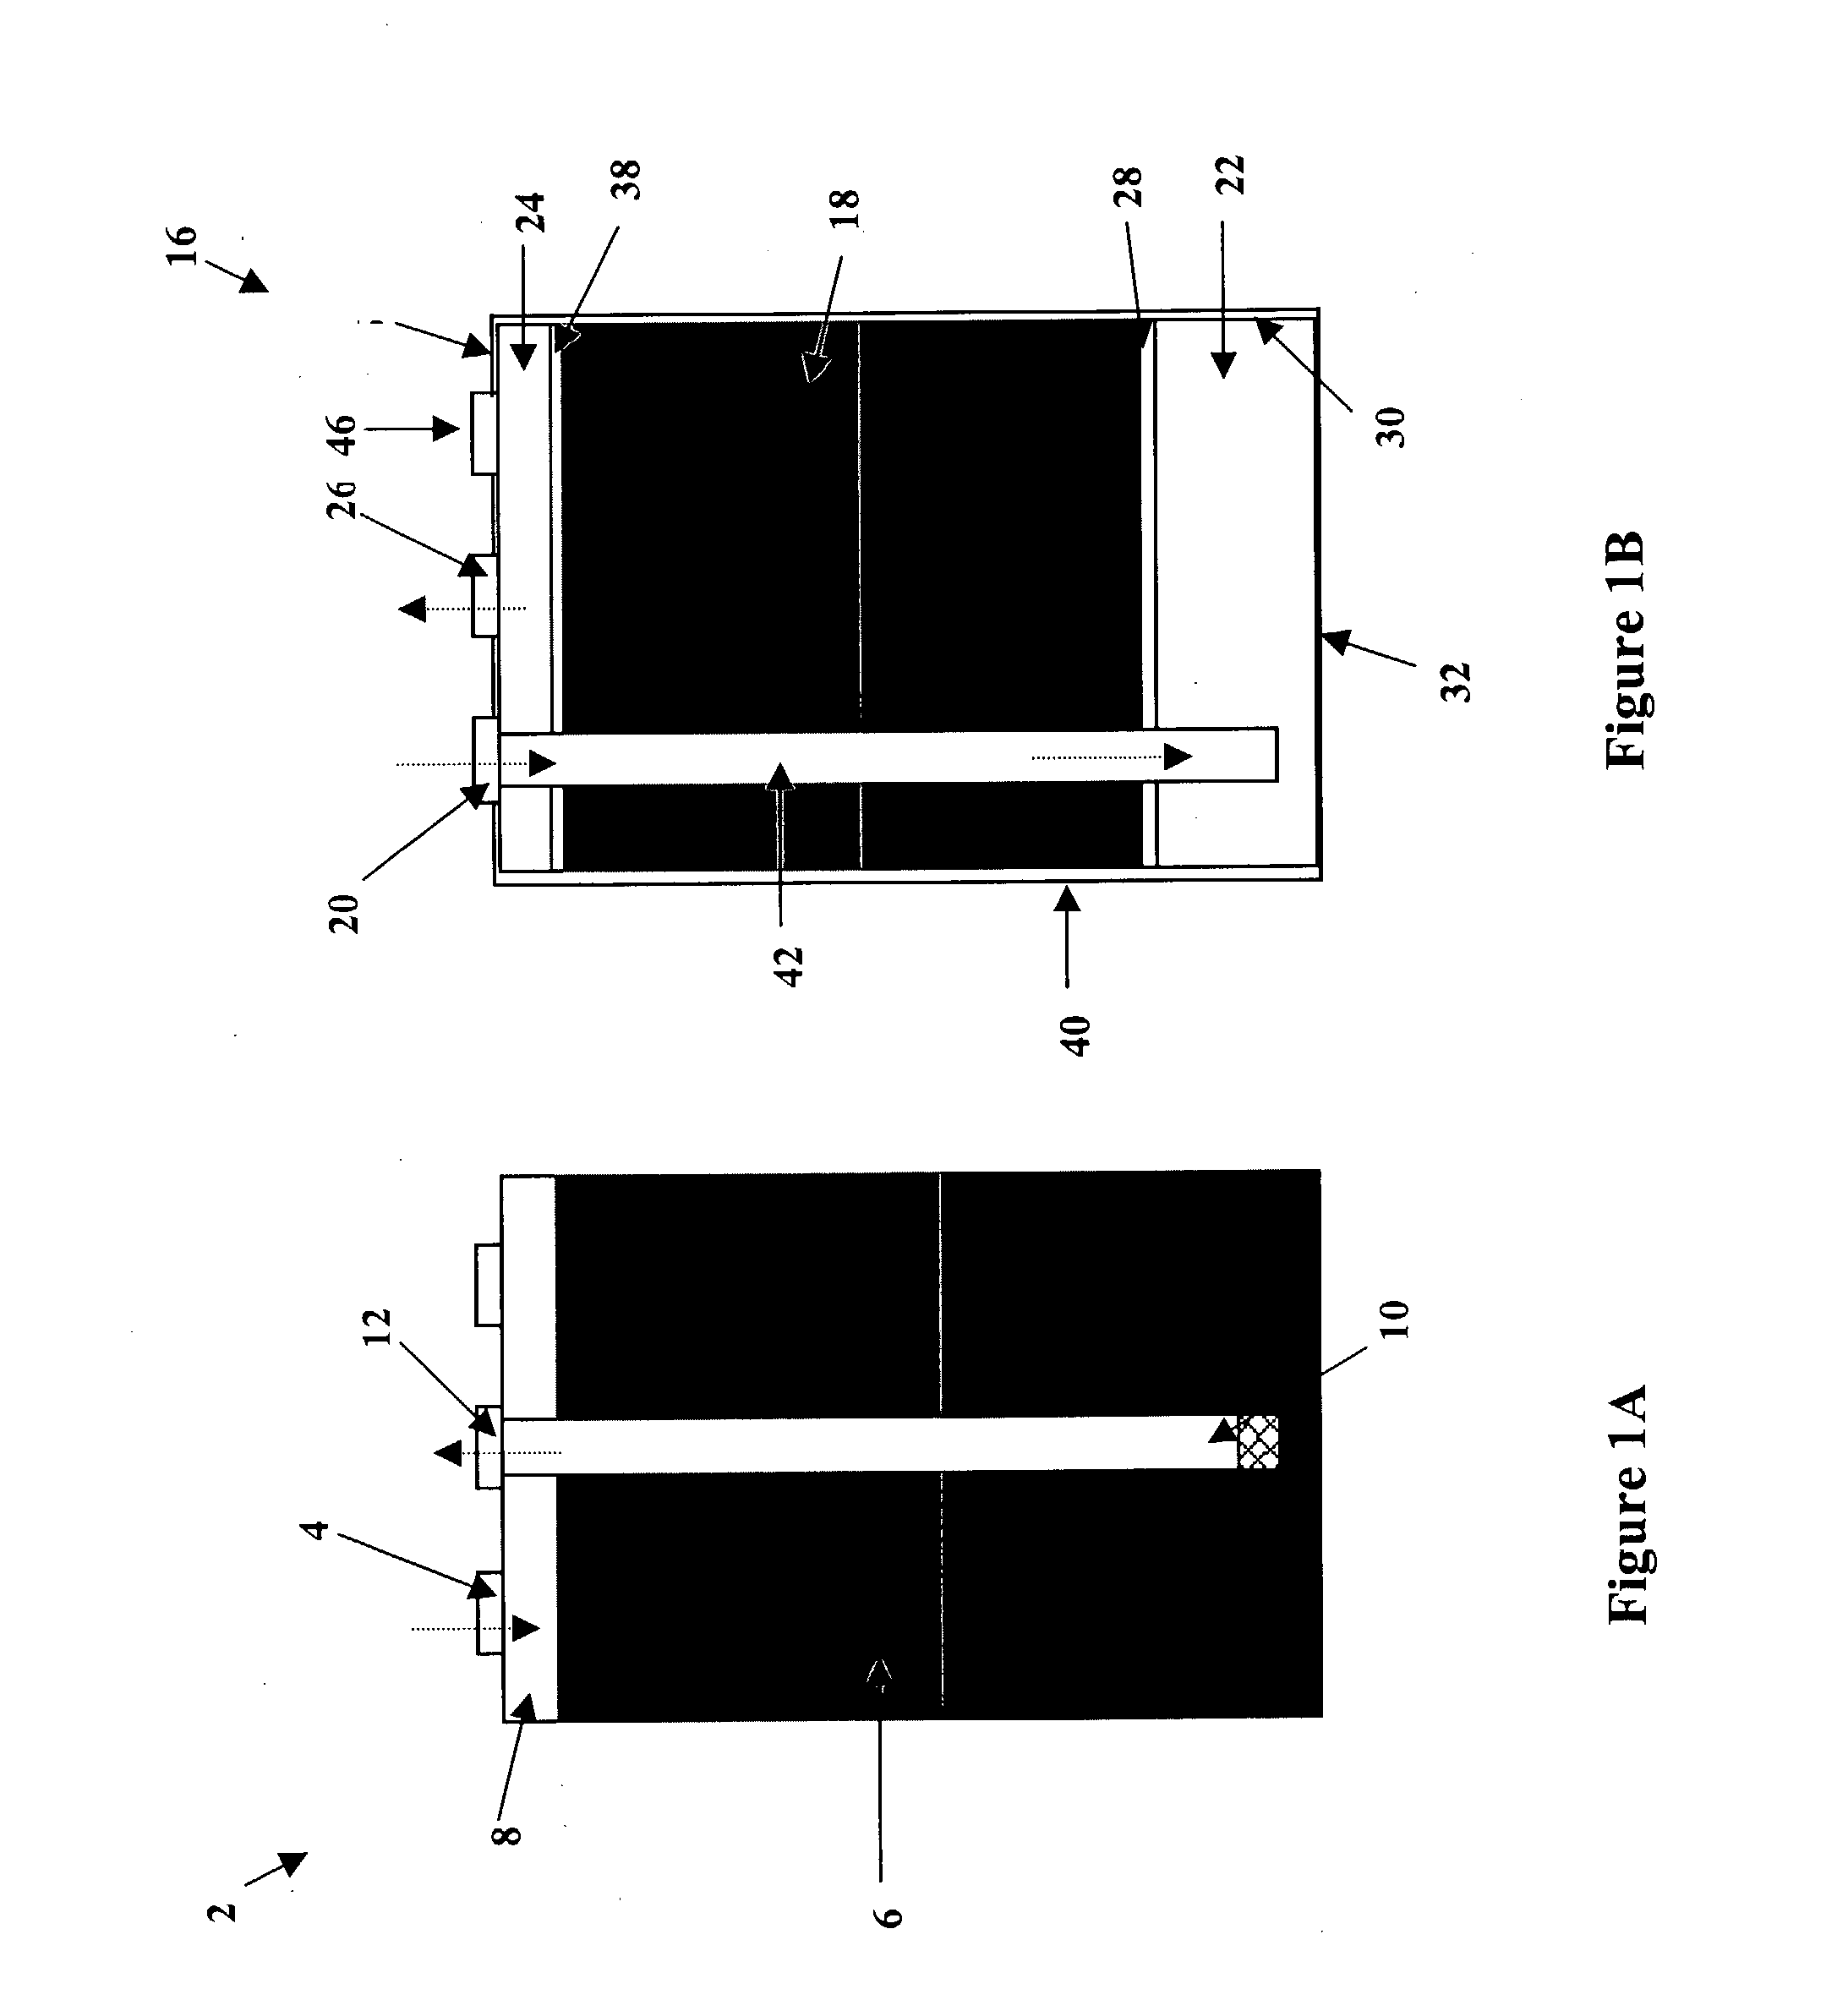 Low pressure drop canister for fixed bed scrubber applications and method of using same